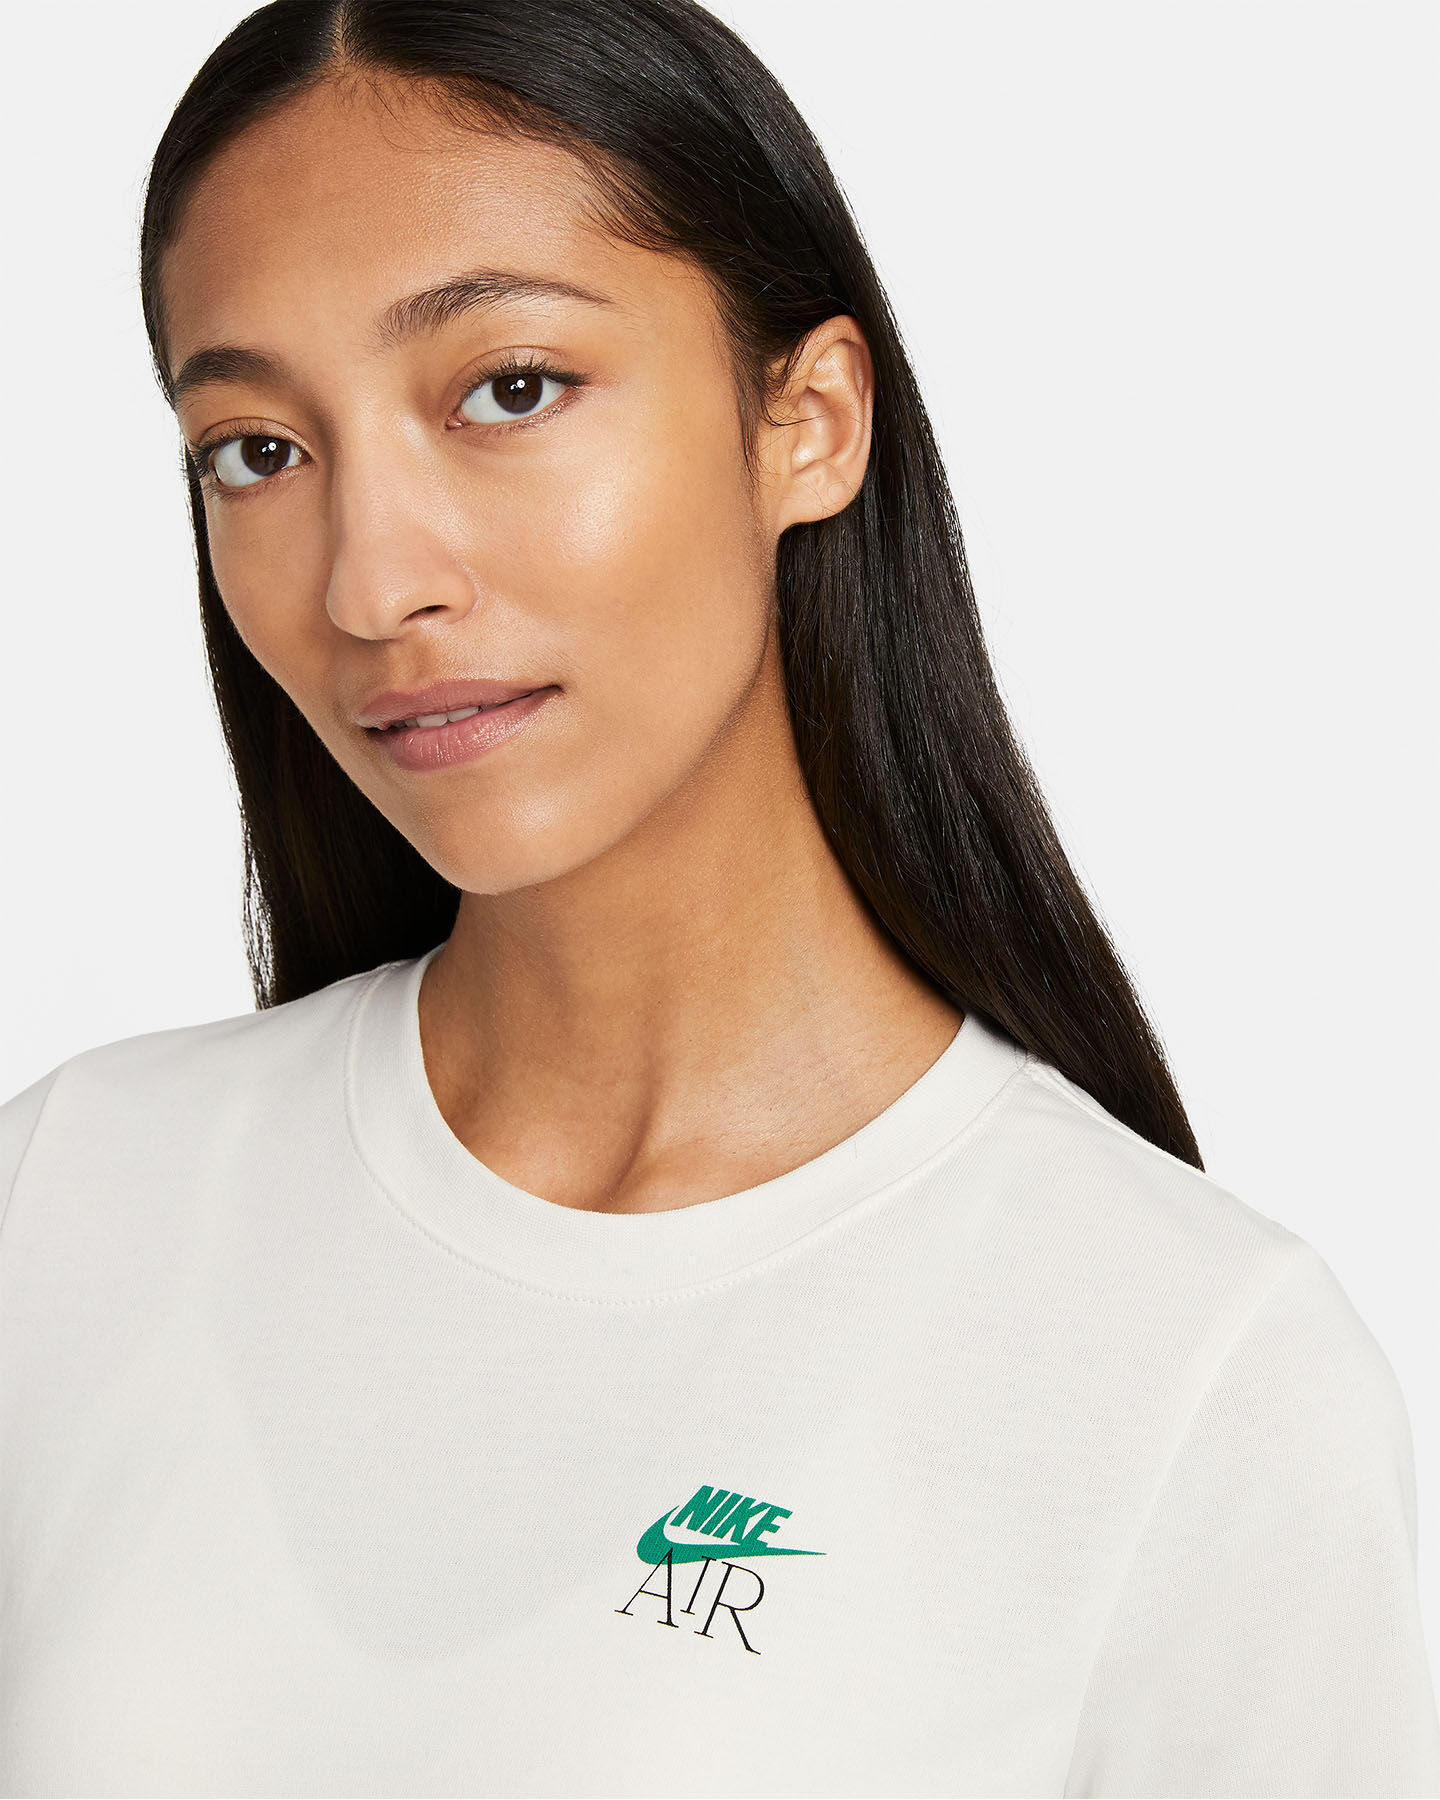  T-Shirt NIKE LOGO EARTH DAY W S5267755|901|XS scatto 2